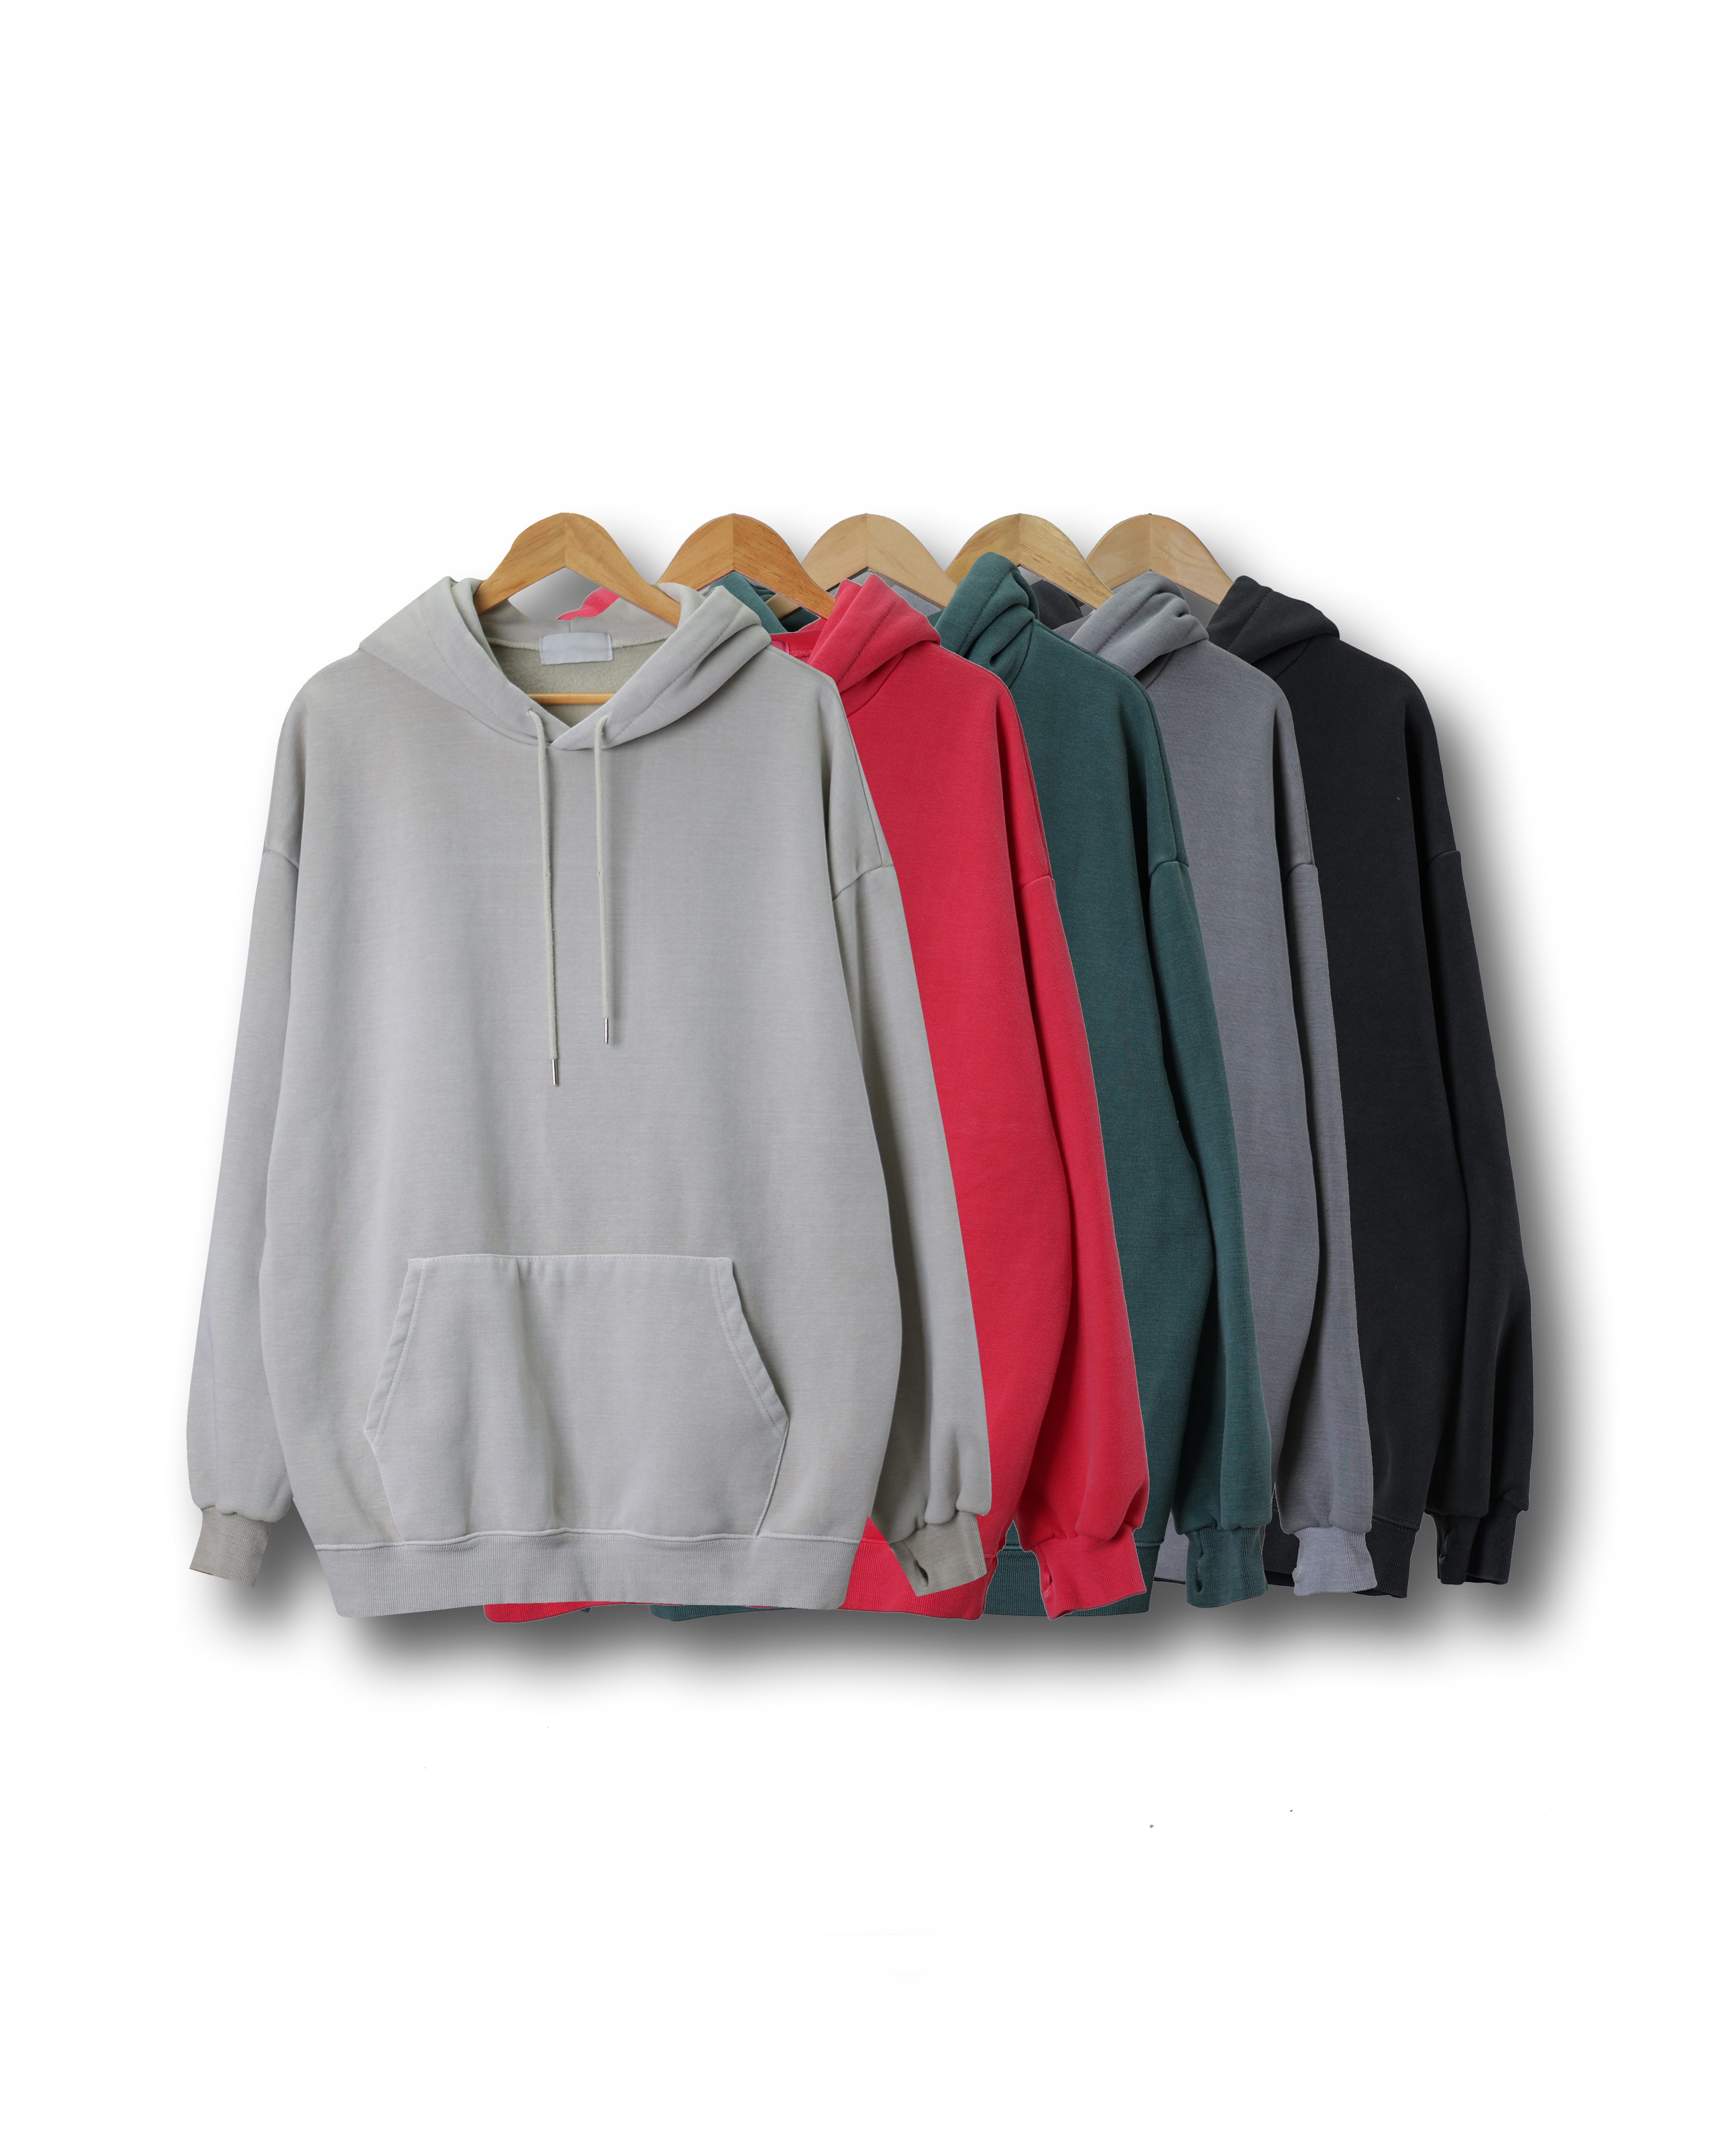 ROUMR Winter Pig Warmer Hoodie (Charcoal/Gray/Green/Pink/Beige Gray)